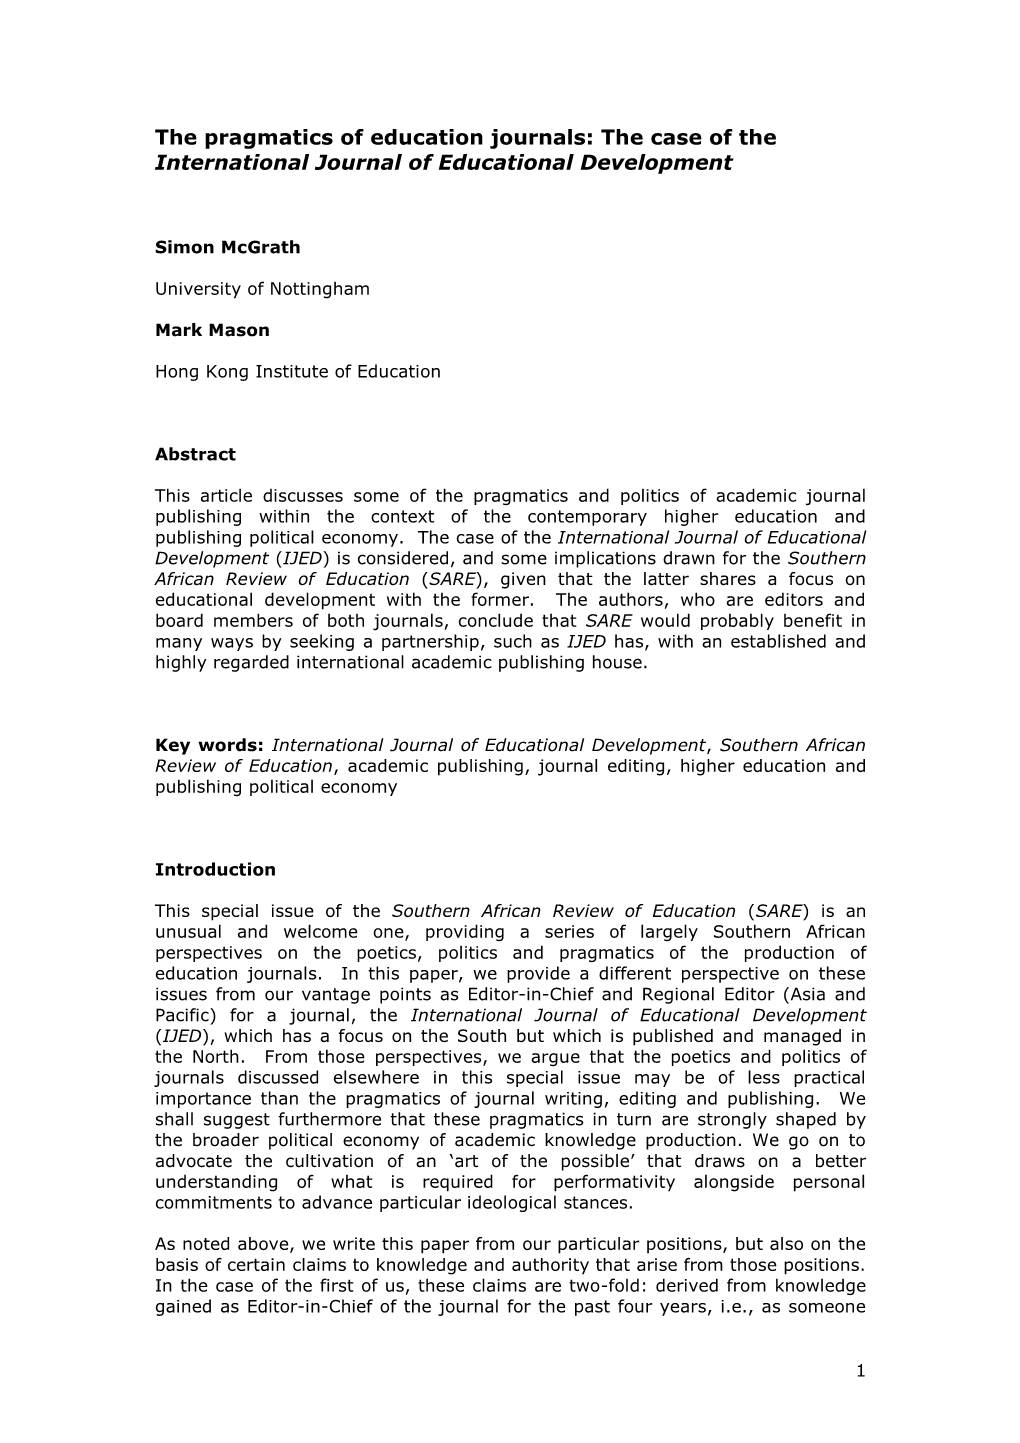 The Case of the International Journal of Educational Development